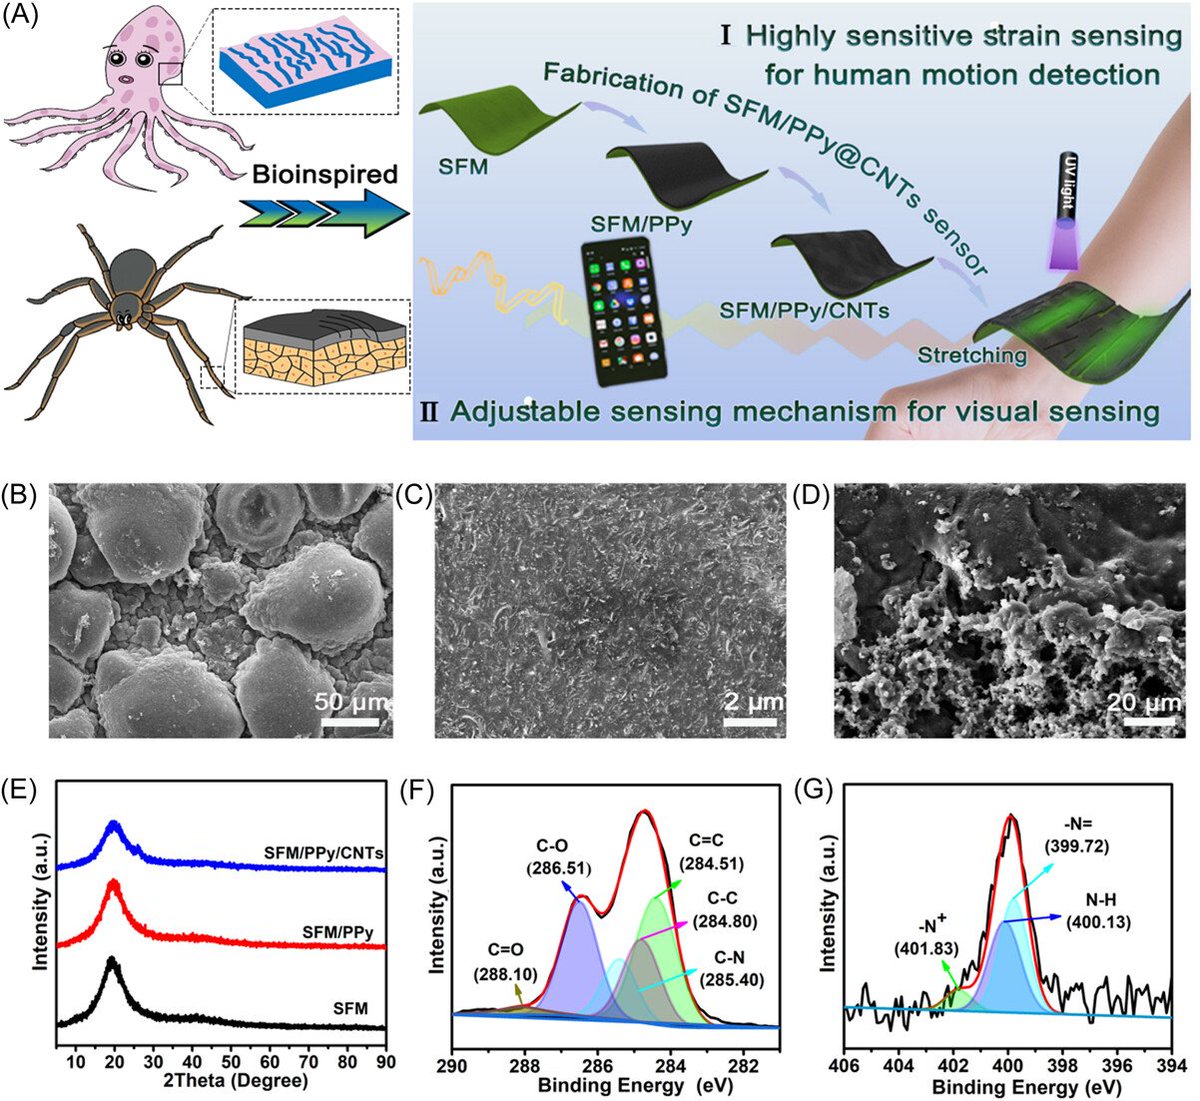 Stretchable hybrid platform-enabled interactive perception of strain sensing and visualization @Wiley_Chemistry @wileyinresearch @InnovationChem @isciverse @AdvSciNews doi.org/10.1002/smm2.1…